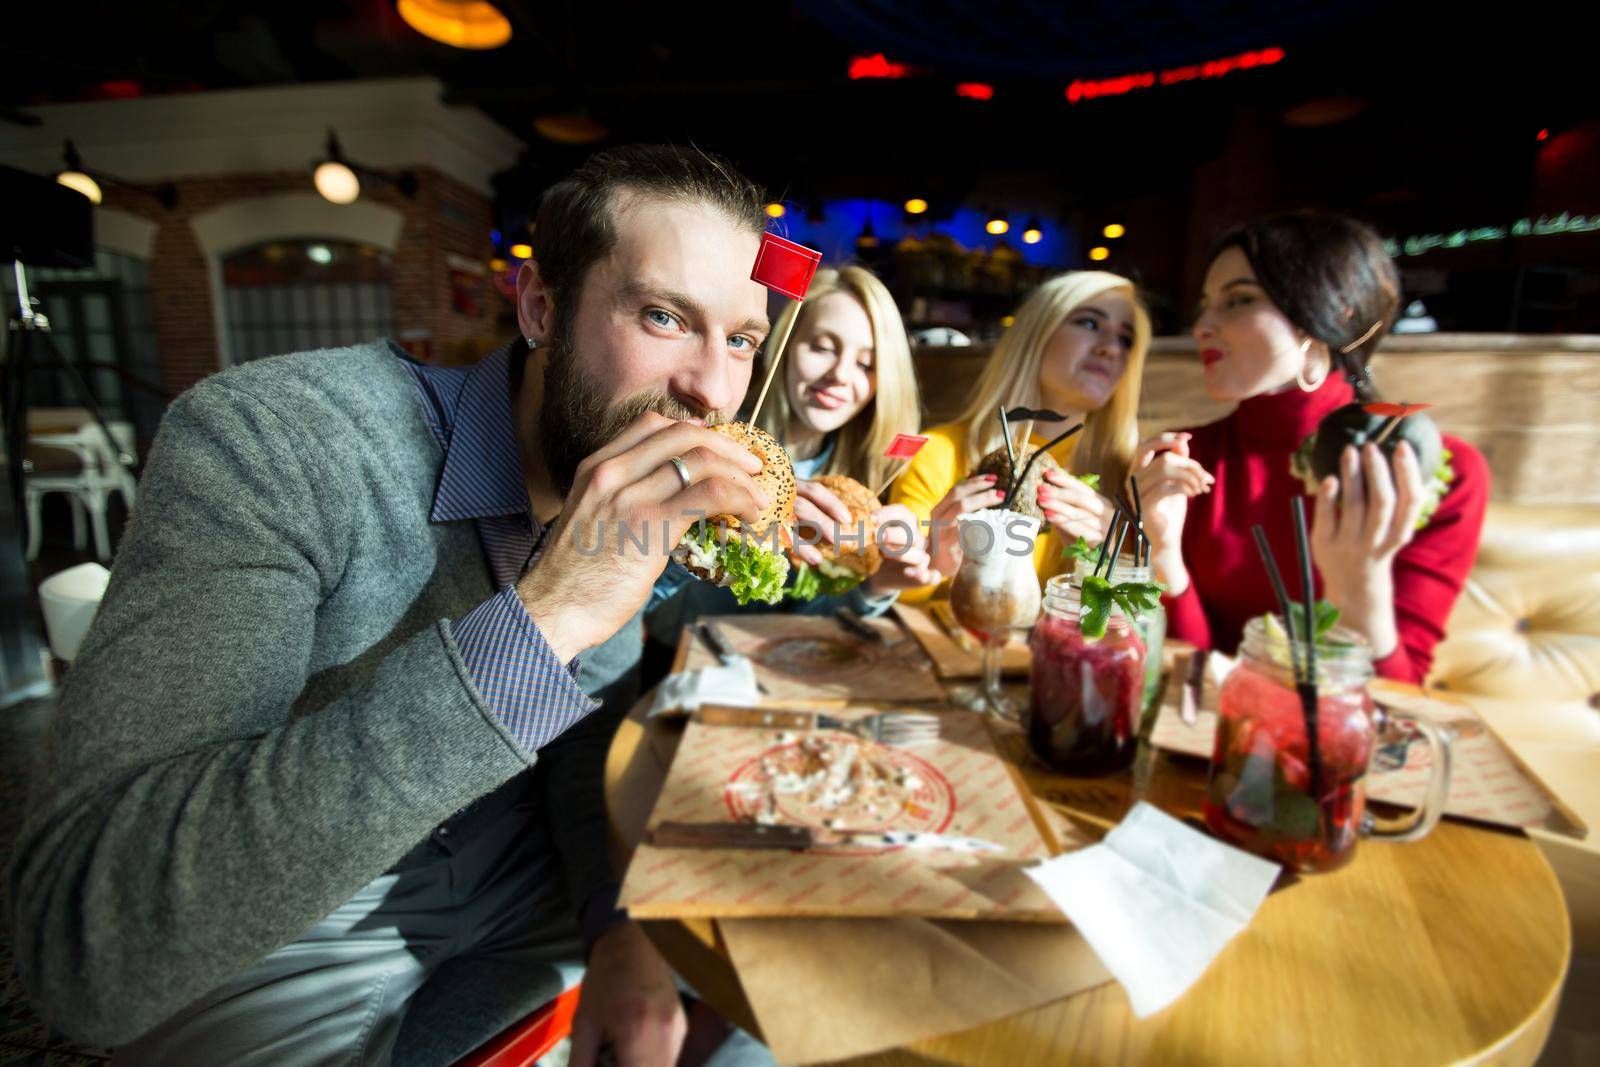 The man takes a bite of his Burger and looking at the camera. Beautiful women laugh and communicate by StudioPeace